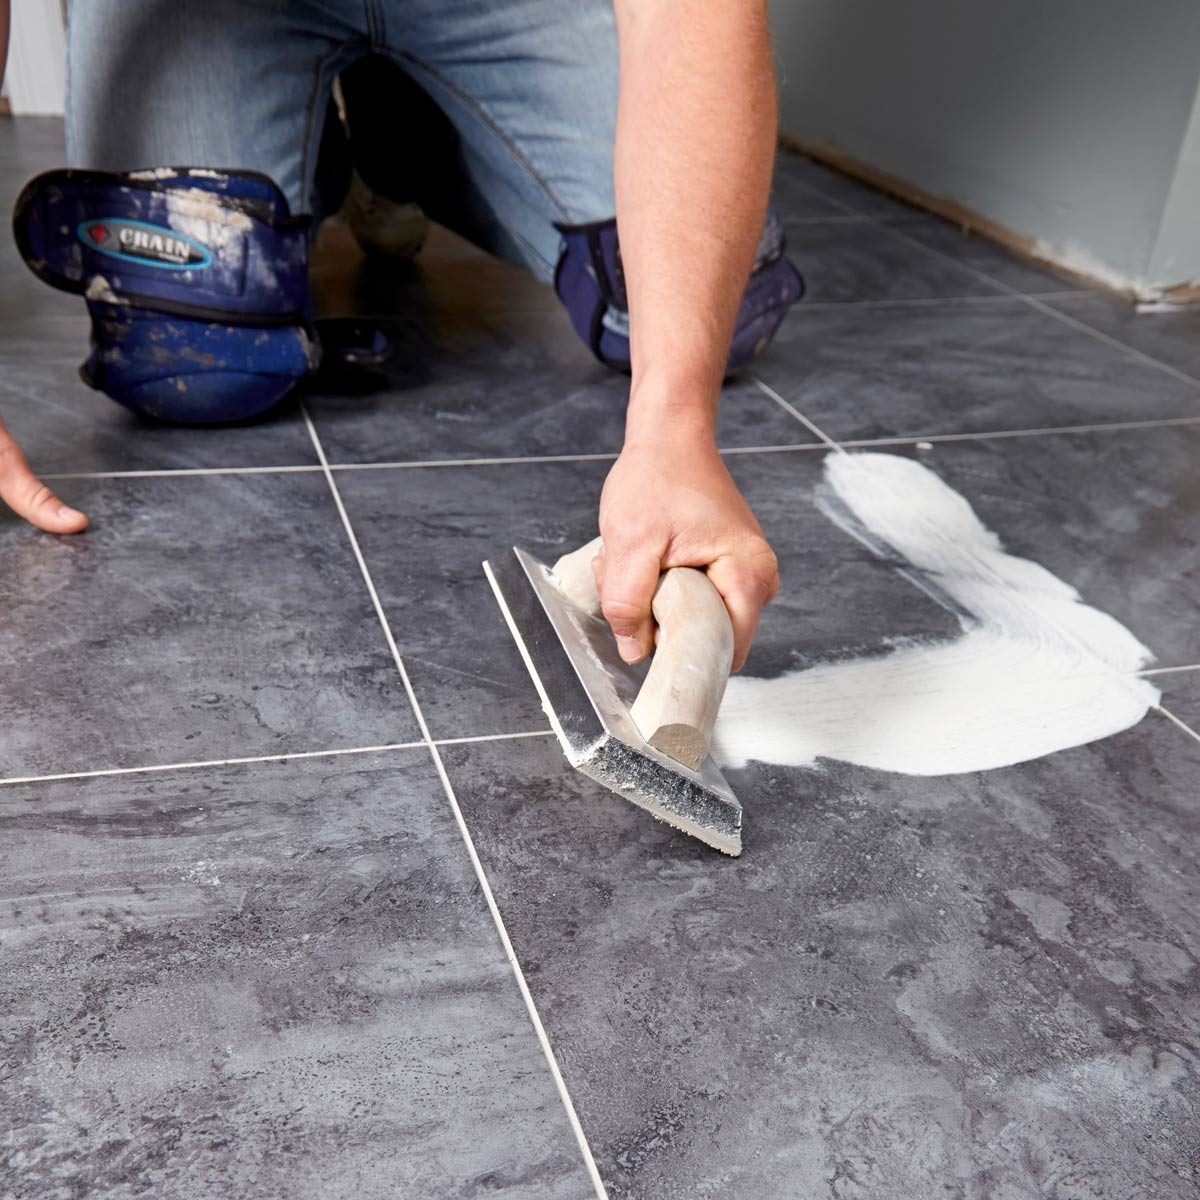 Luxury Vinyl Tile Installation Diy, How To Clean Vinyl Tiles With Grout